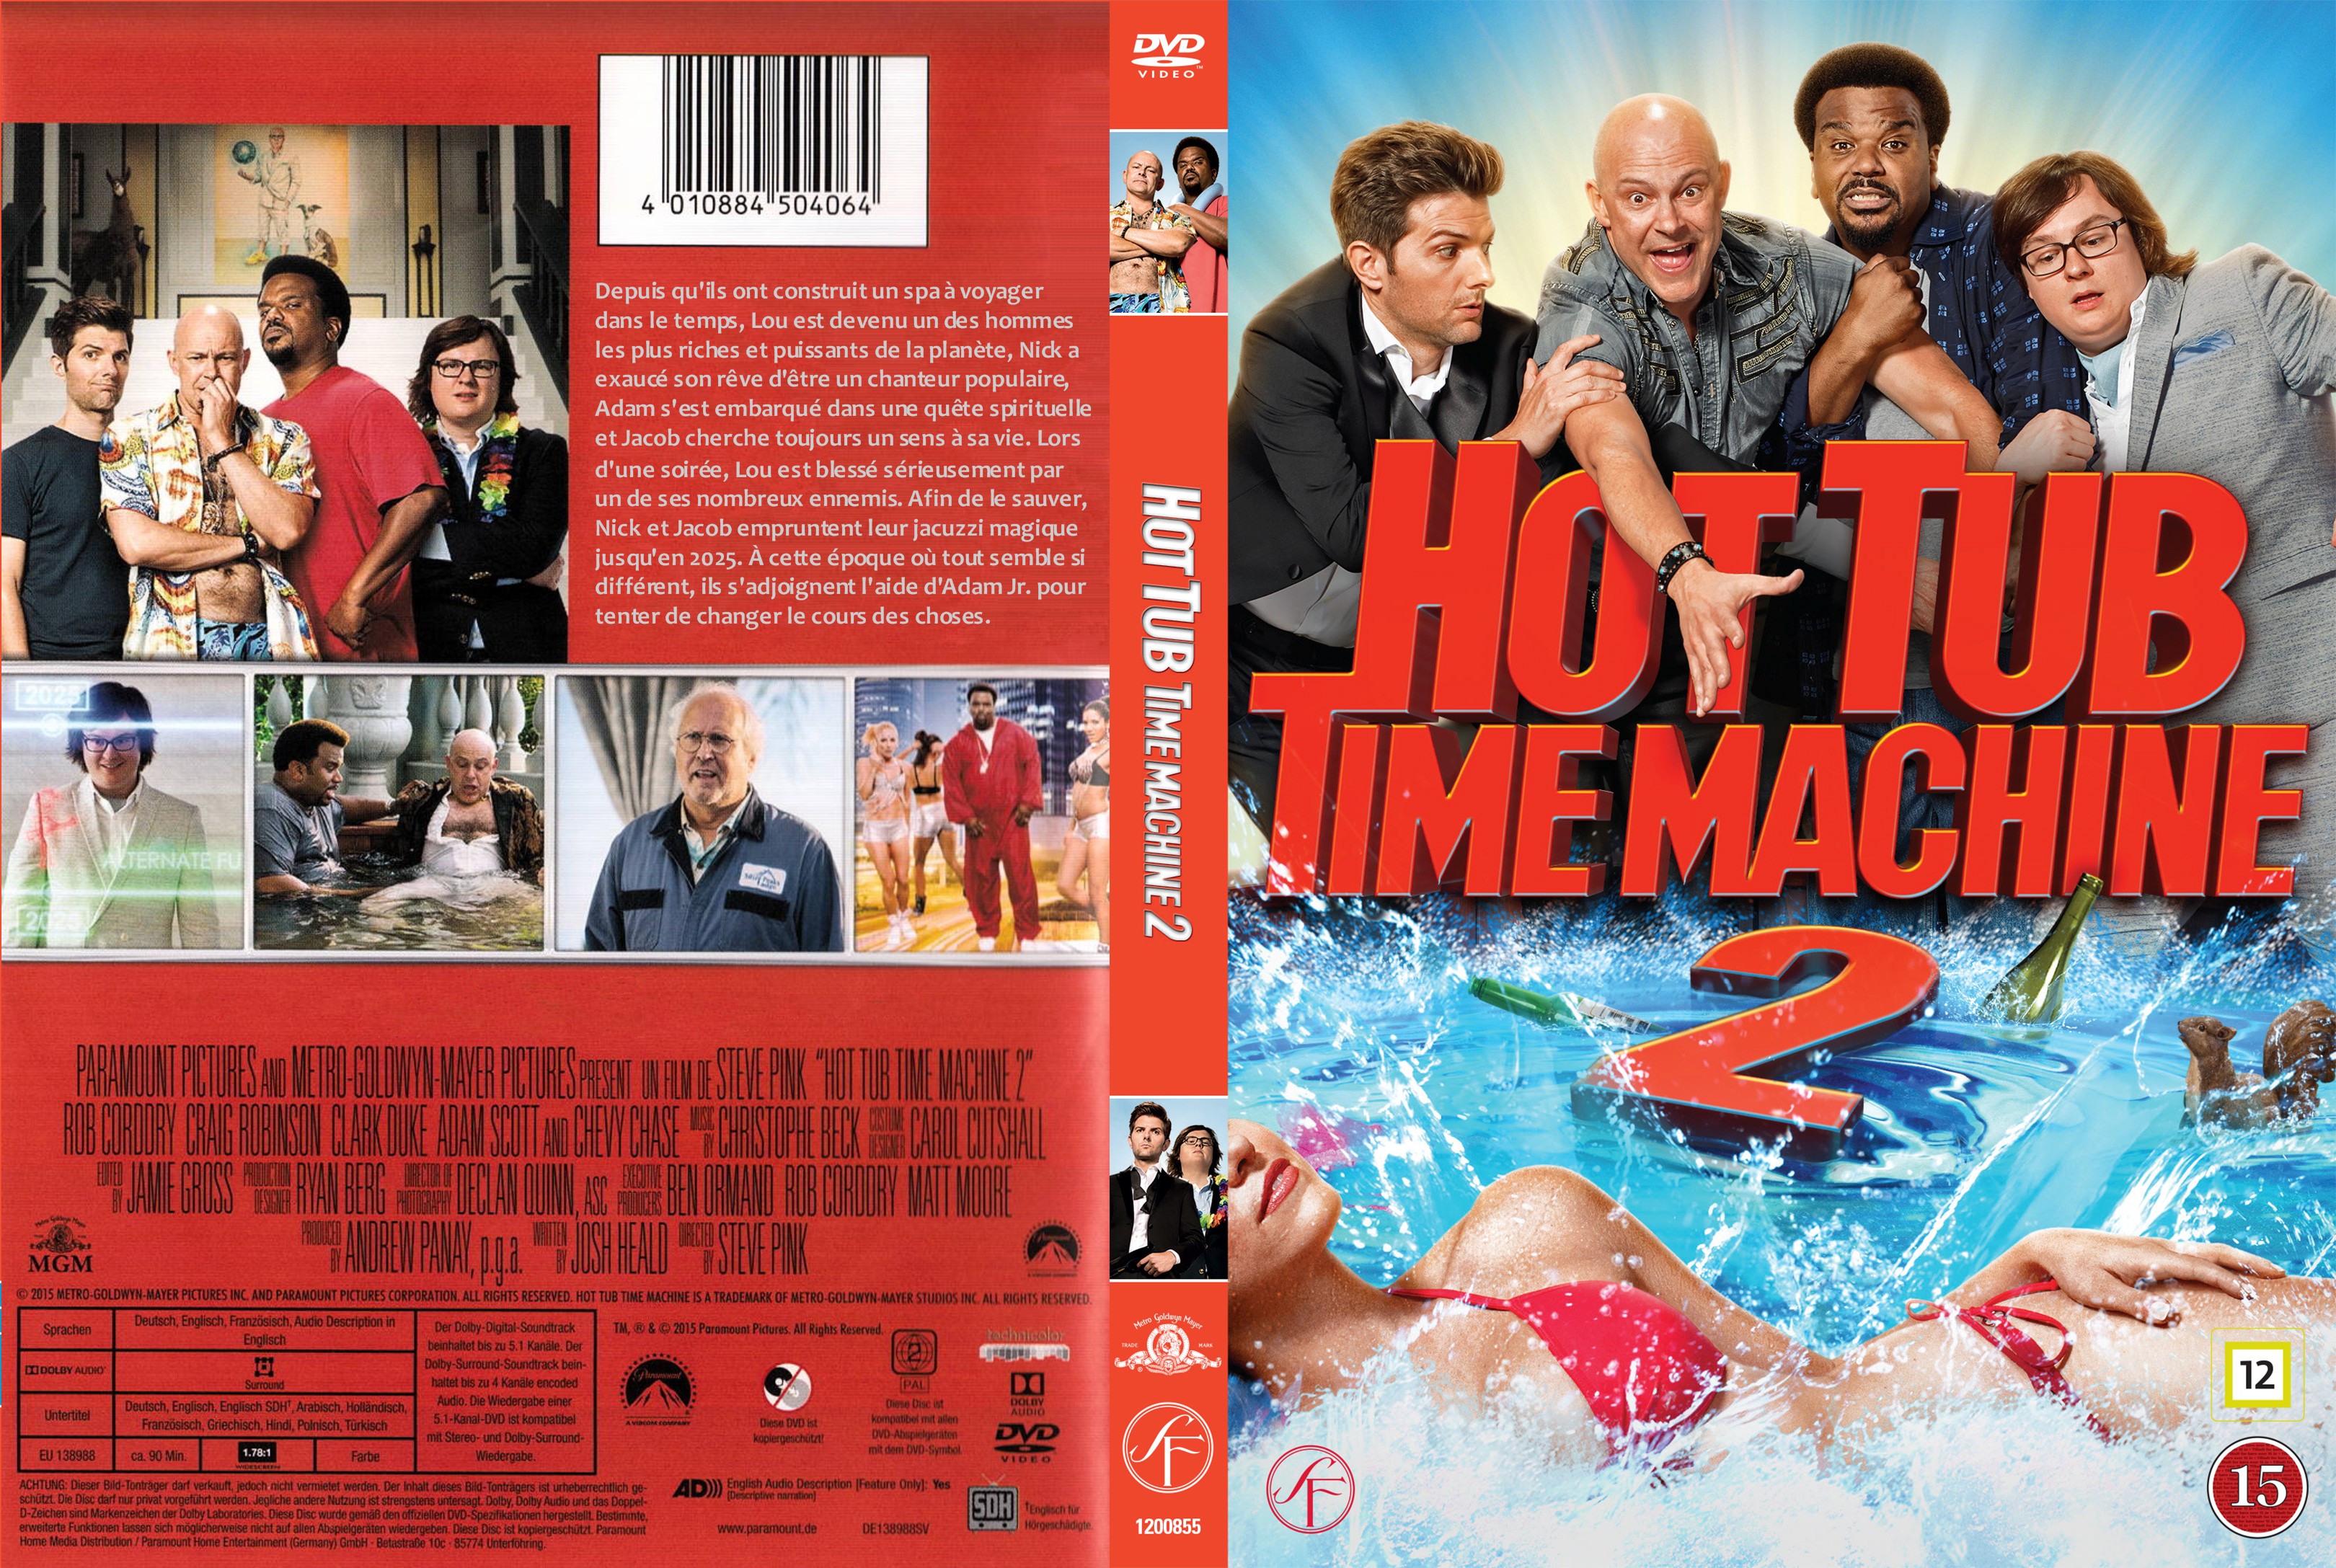 Jaquette DVD Hot Tube Time Machine 2